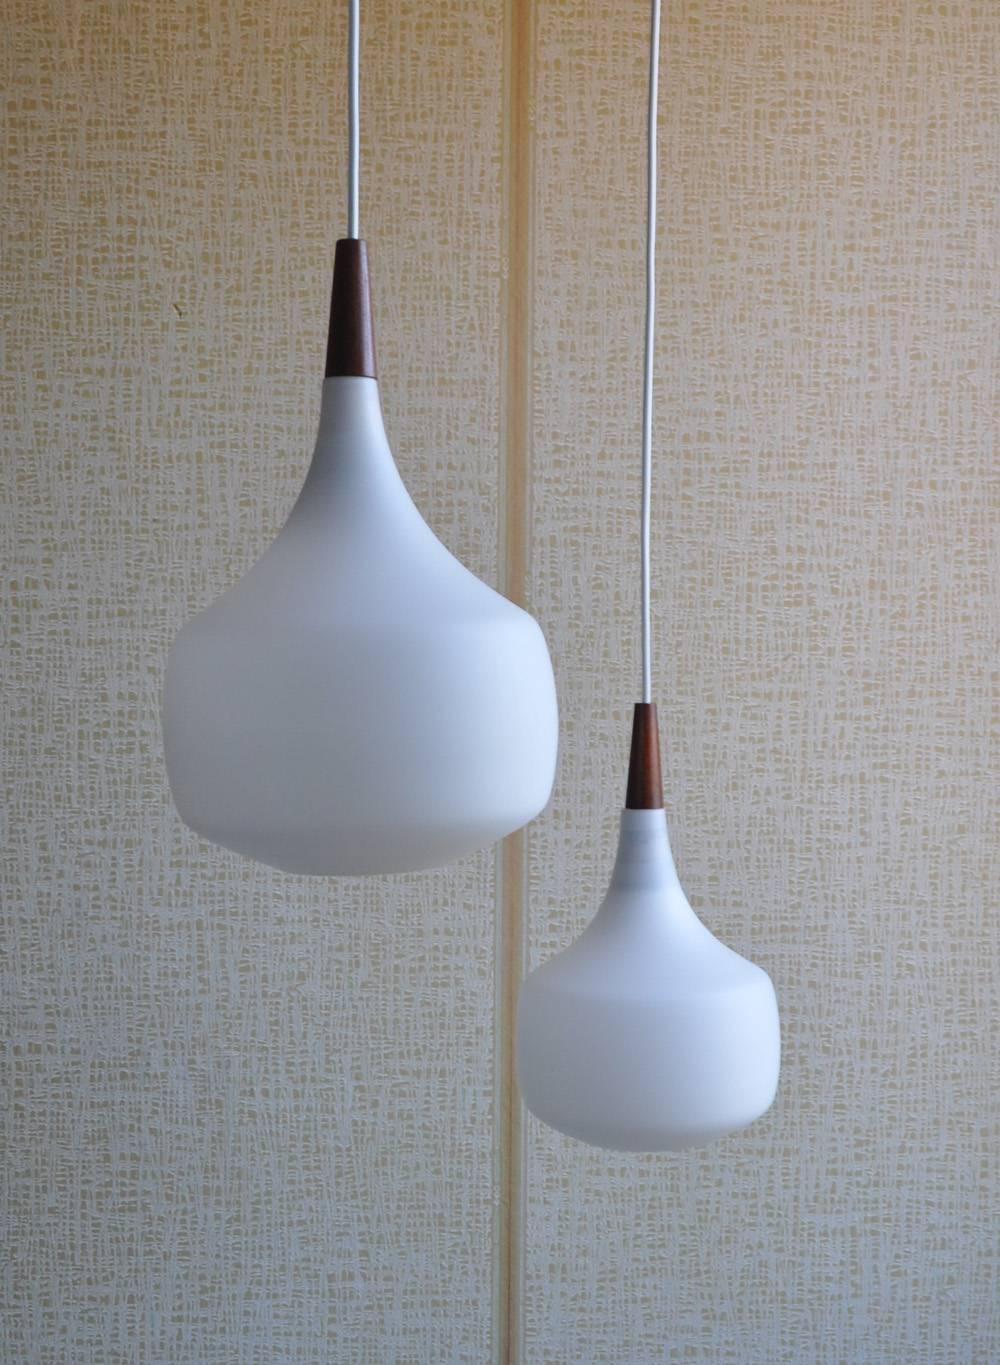 Scandinavian midcentury minimalisme. Clean sharp lines and forms. 
Holmegaard hanging lamp from Denmark, teak and opaline glass.
Signs of wear consistent with age and use.

Measures: Height 33.5 cm, diameter 21 cm.
Height 29.5 cm, diameter 17.5